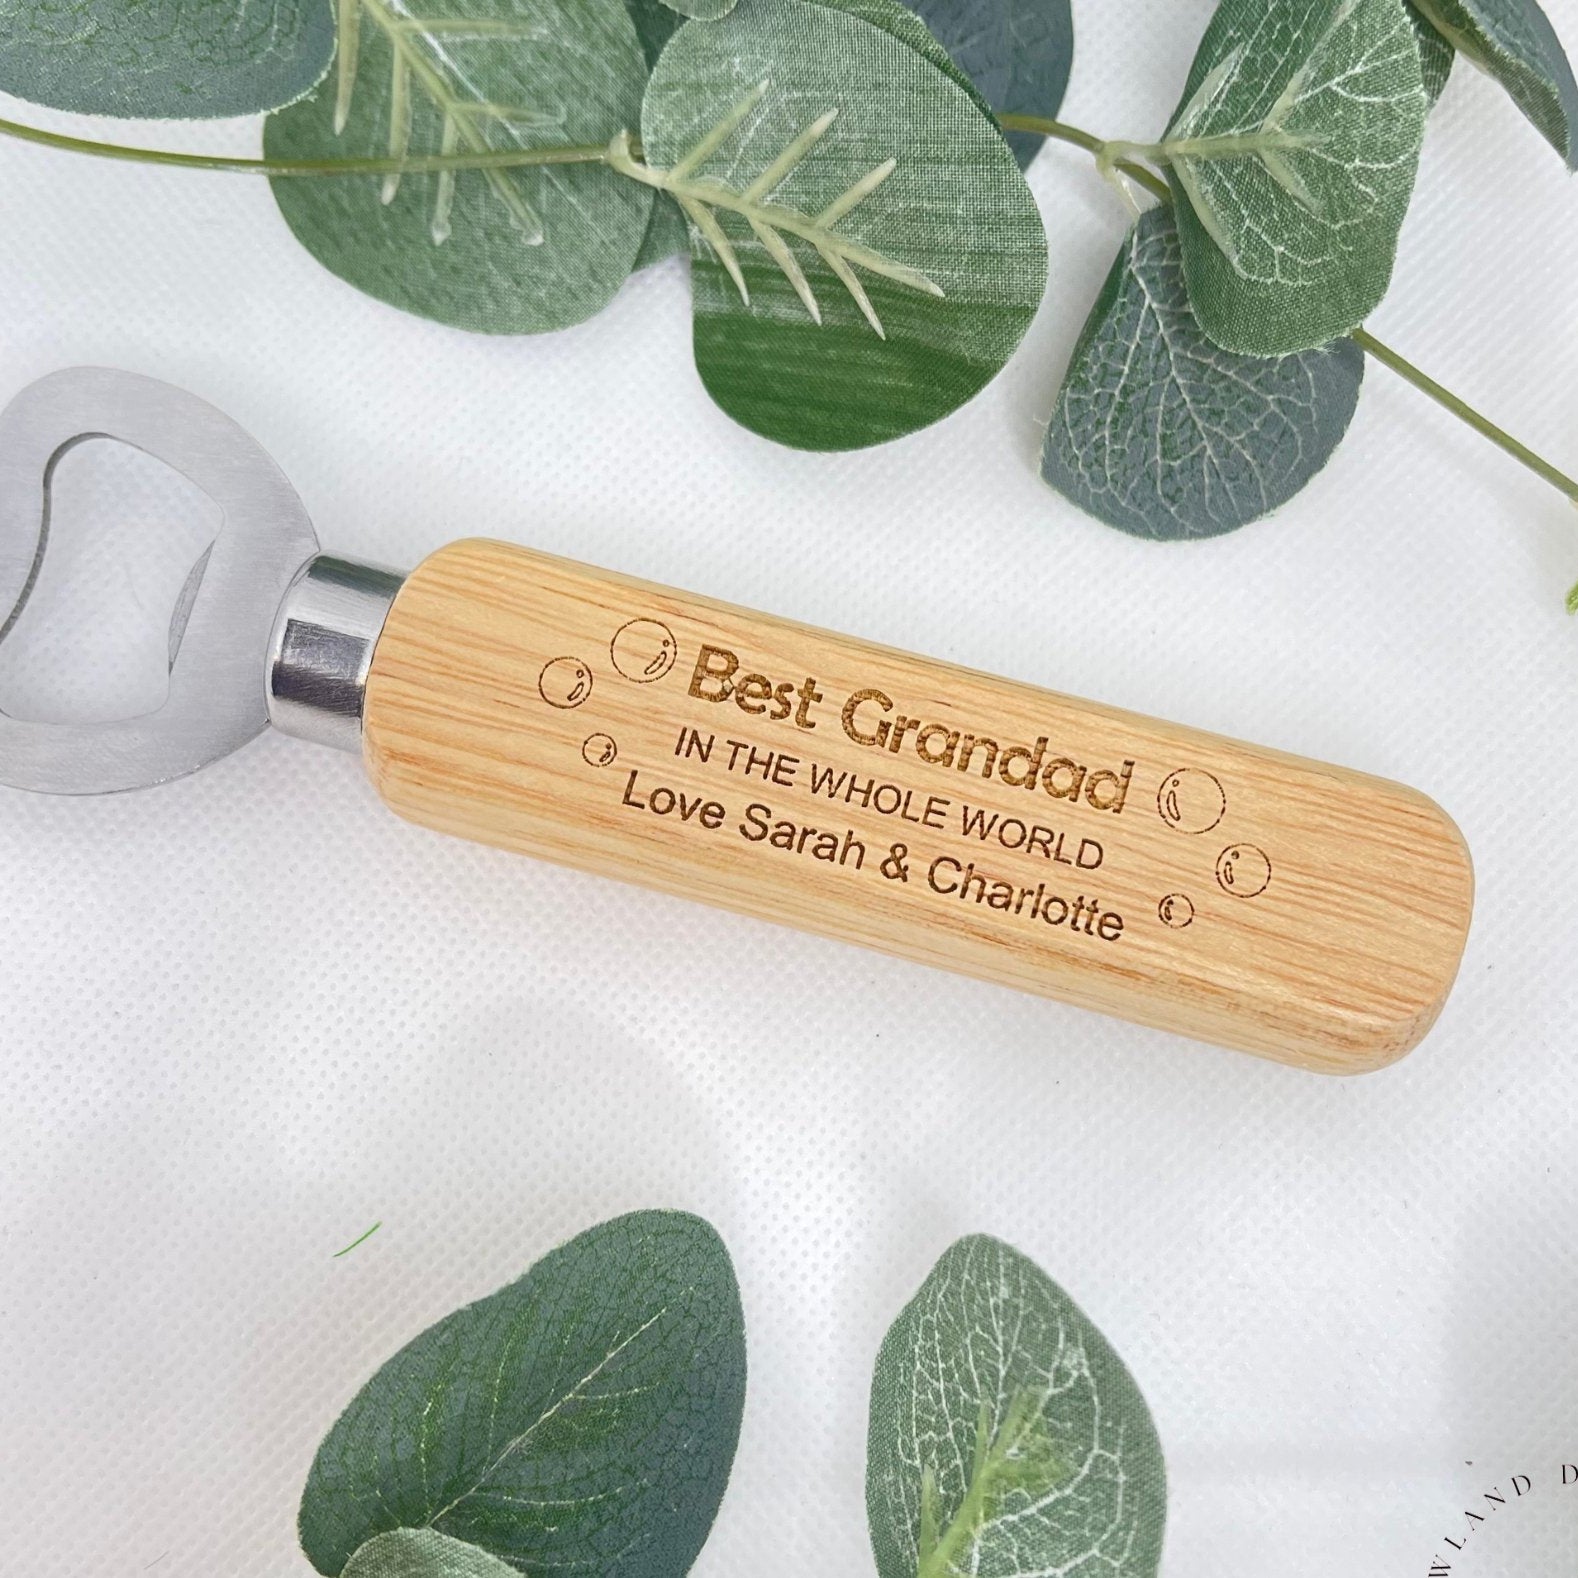 Personalised Wooden Handle Bottle Opener with Stainless Steel Metal Part.